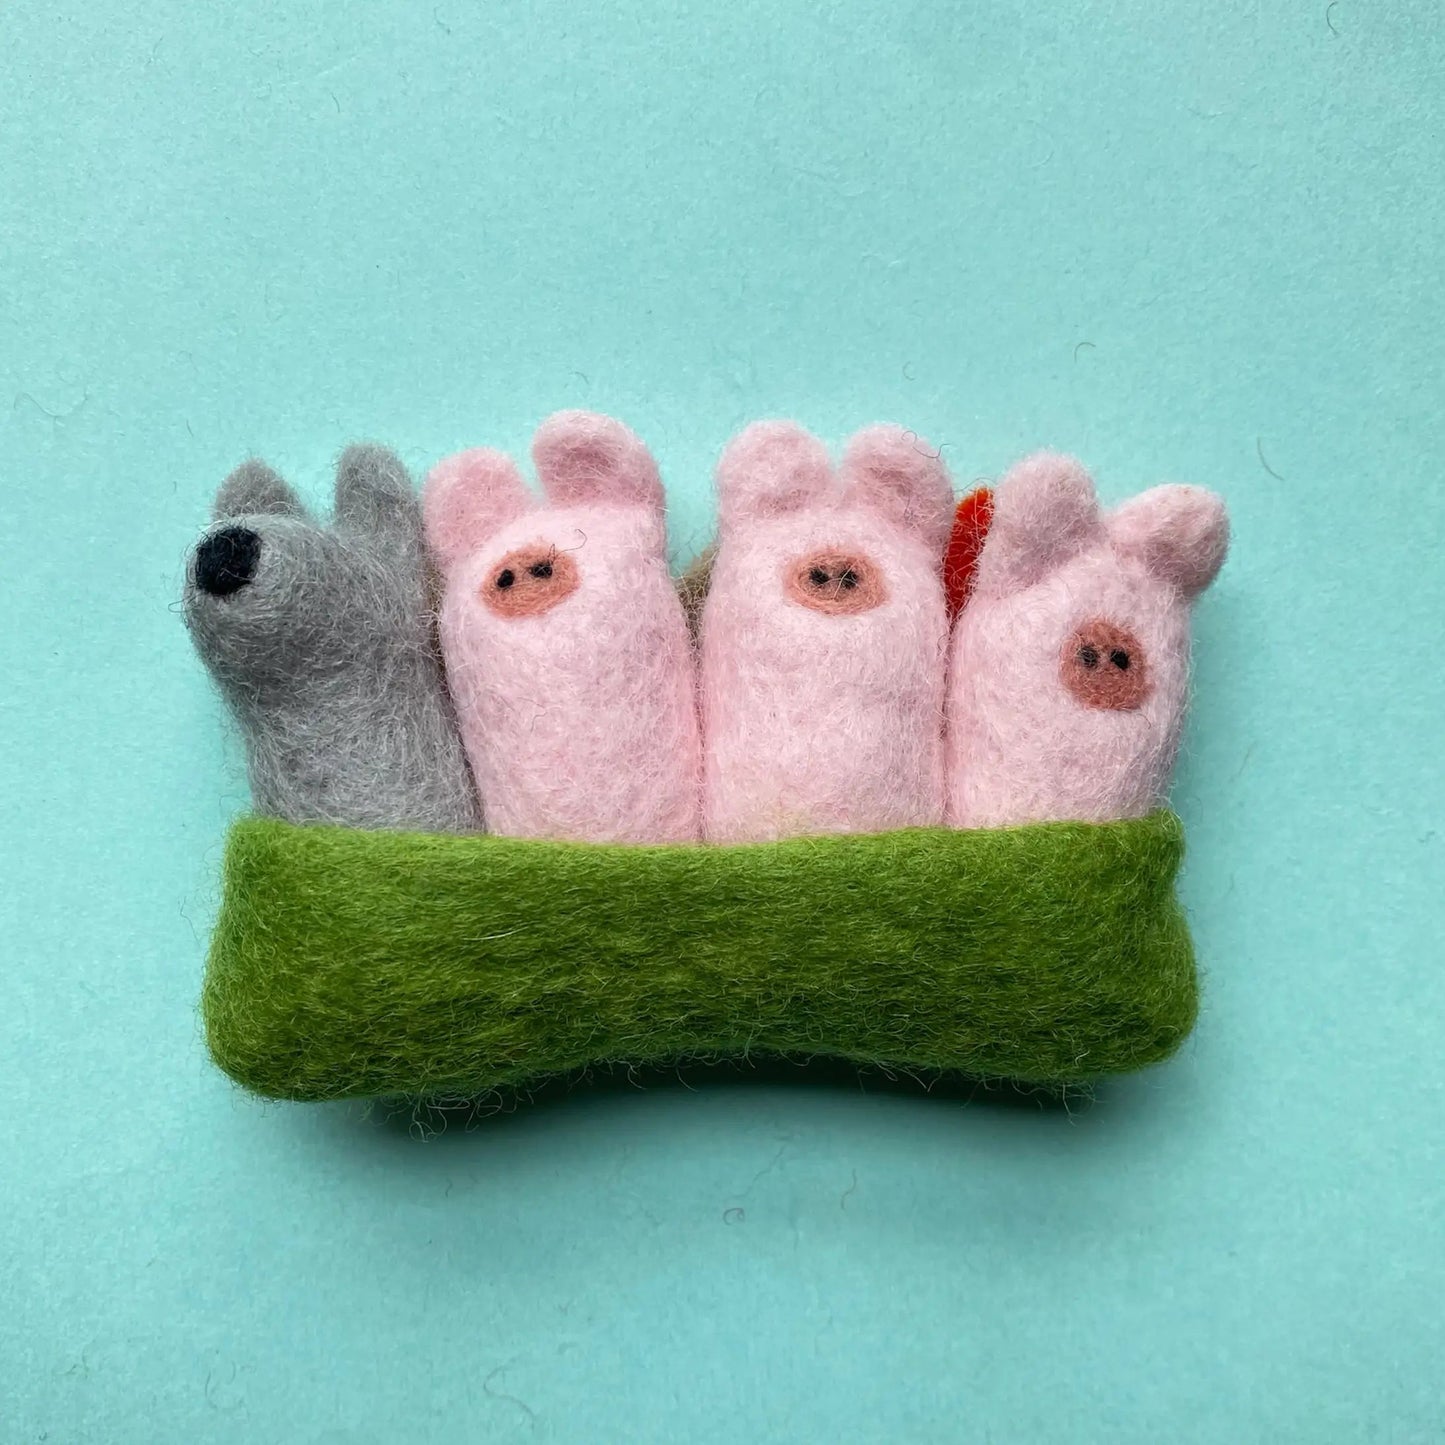 The Three Little Pigs and Wolf Felted Storytelling Props - Alder & Alouette